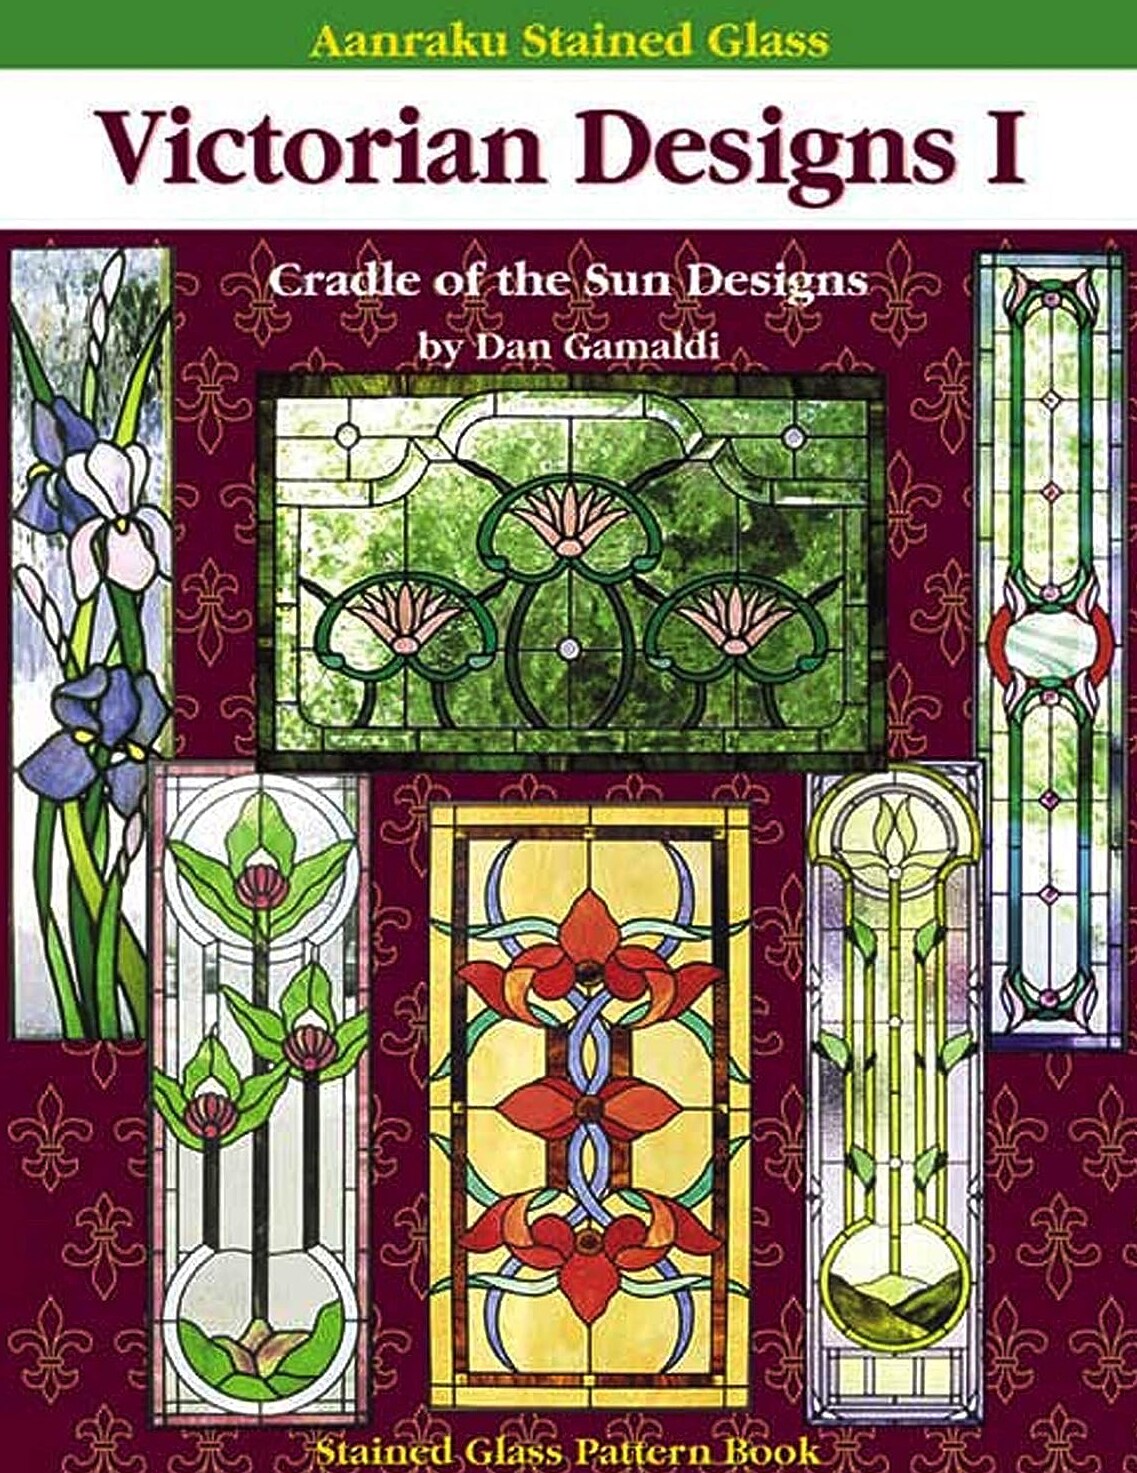 Stained Glass Pattern Book: Victorian Designs I